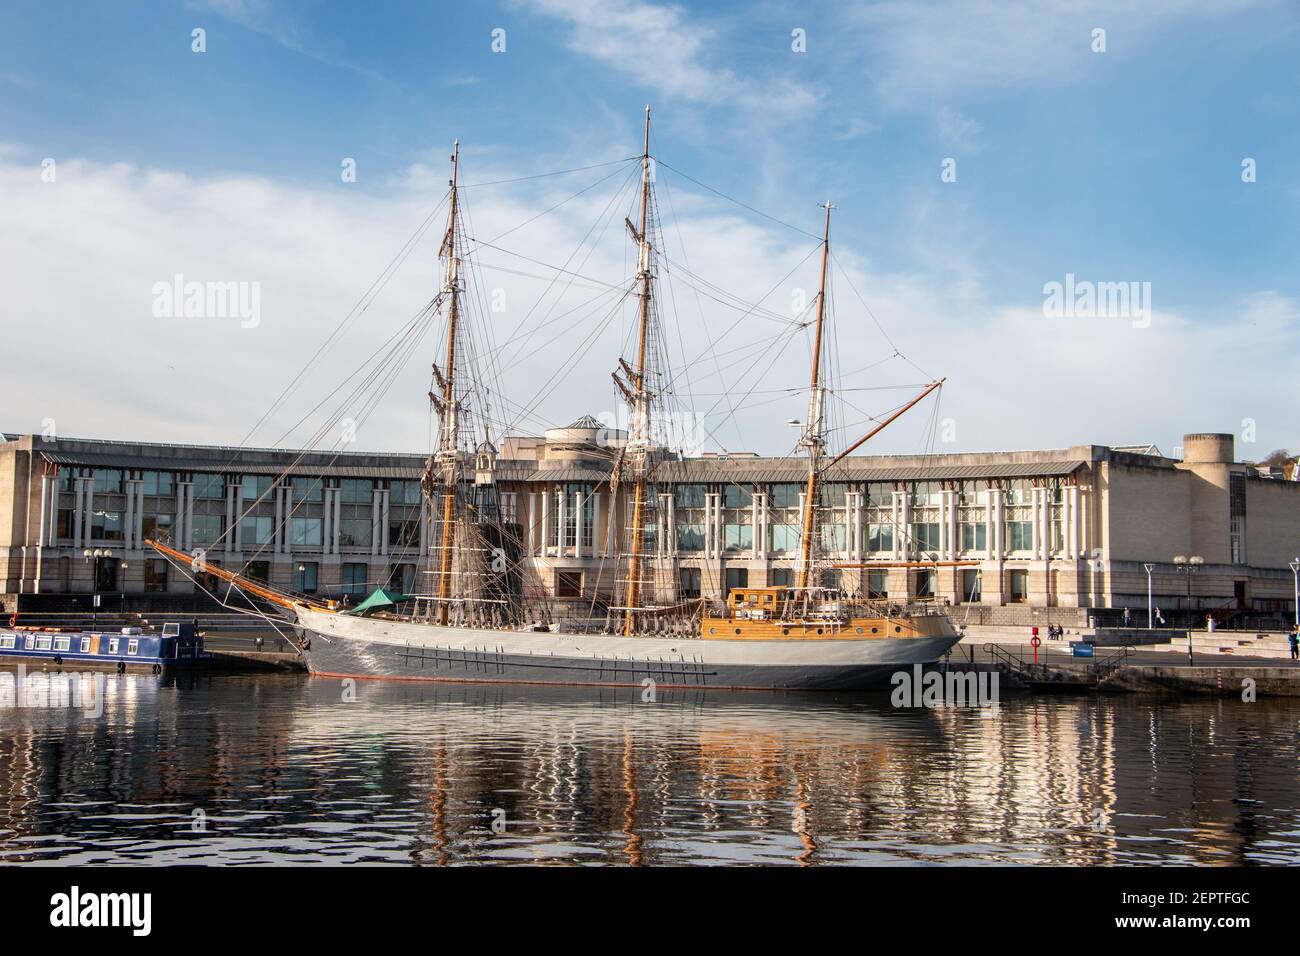 Sailing ship Kaskelot (since renamed 'Le Francais') moored in Bristol Harbour, England, UK, October 2016 Stock Photo